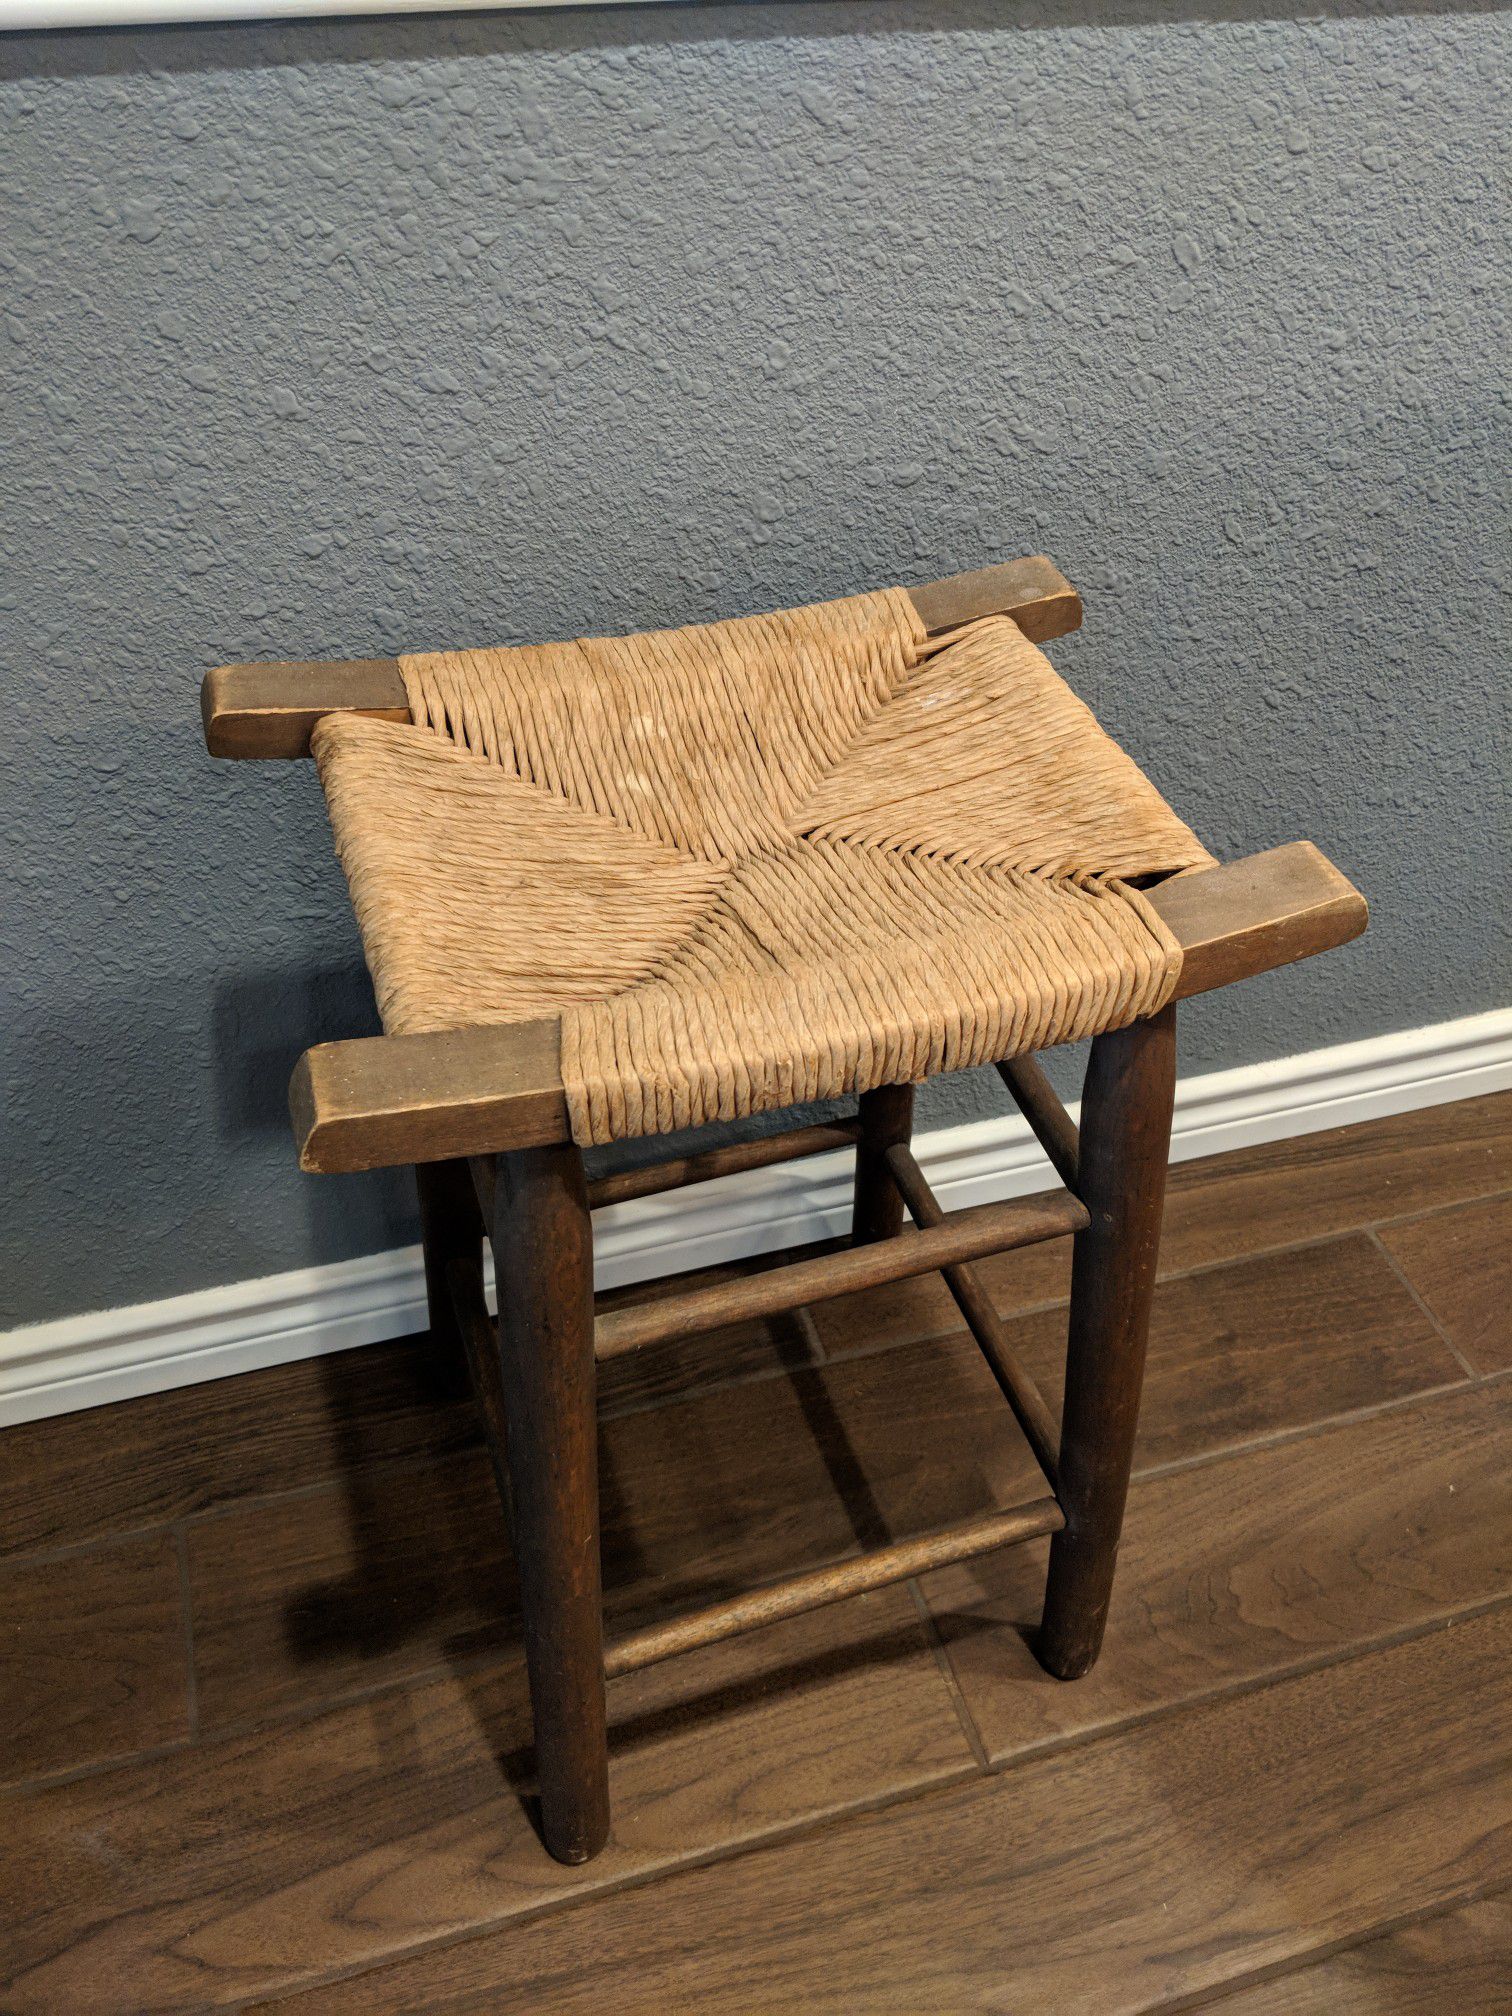 Swedish Style Wooden Wicker Stool Seat Chair